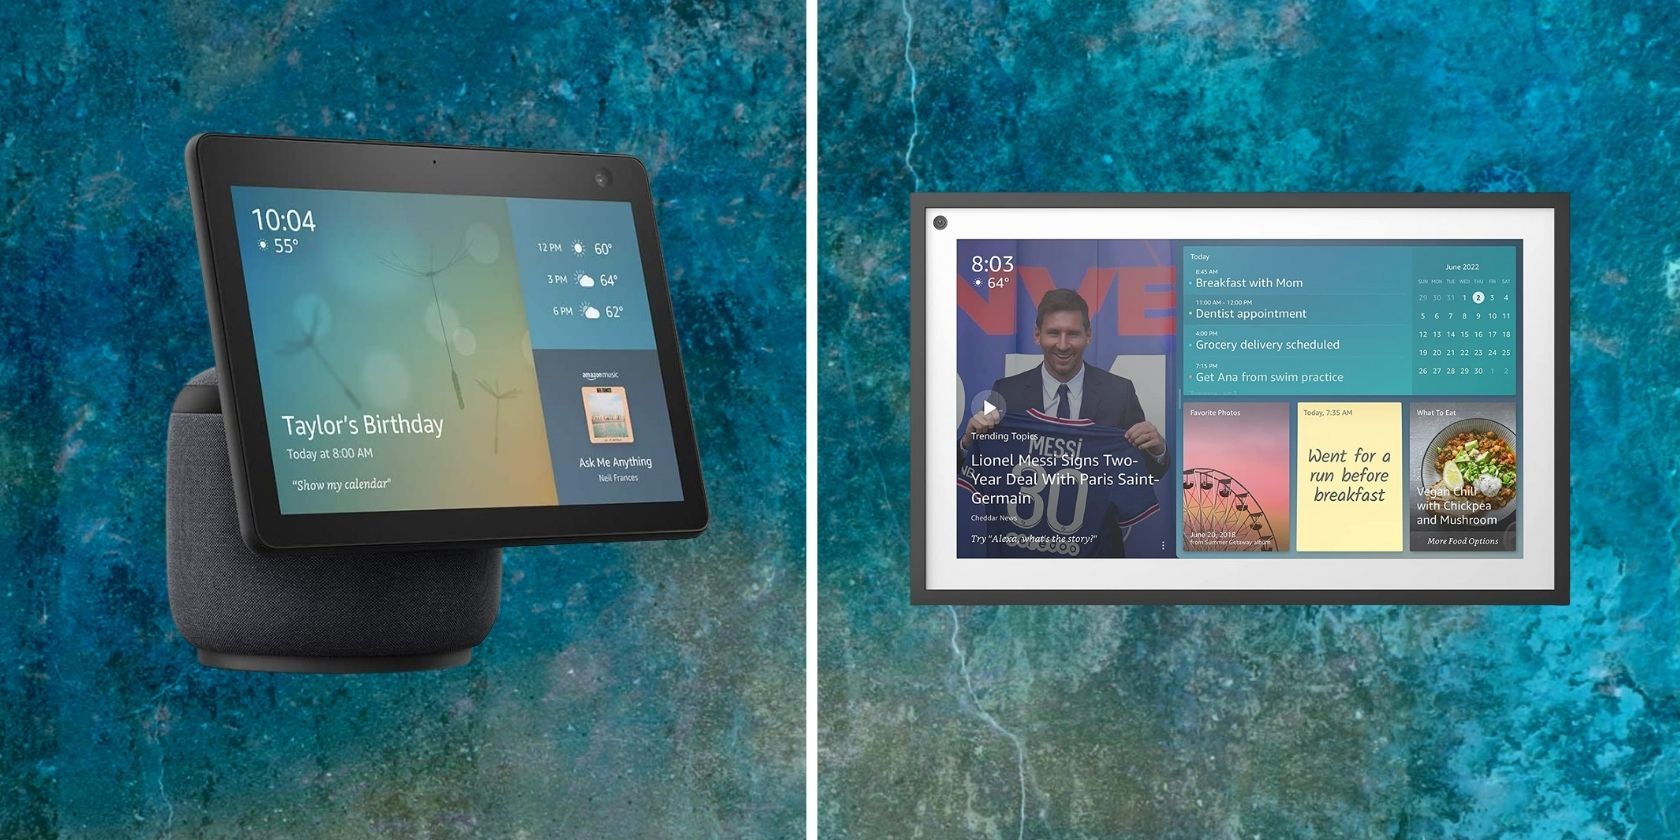 amazon echo show 10 on the left and the echo show 15 on the right